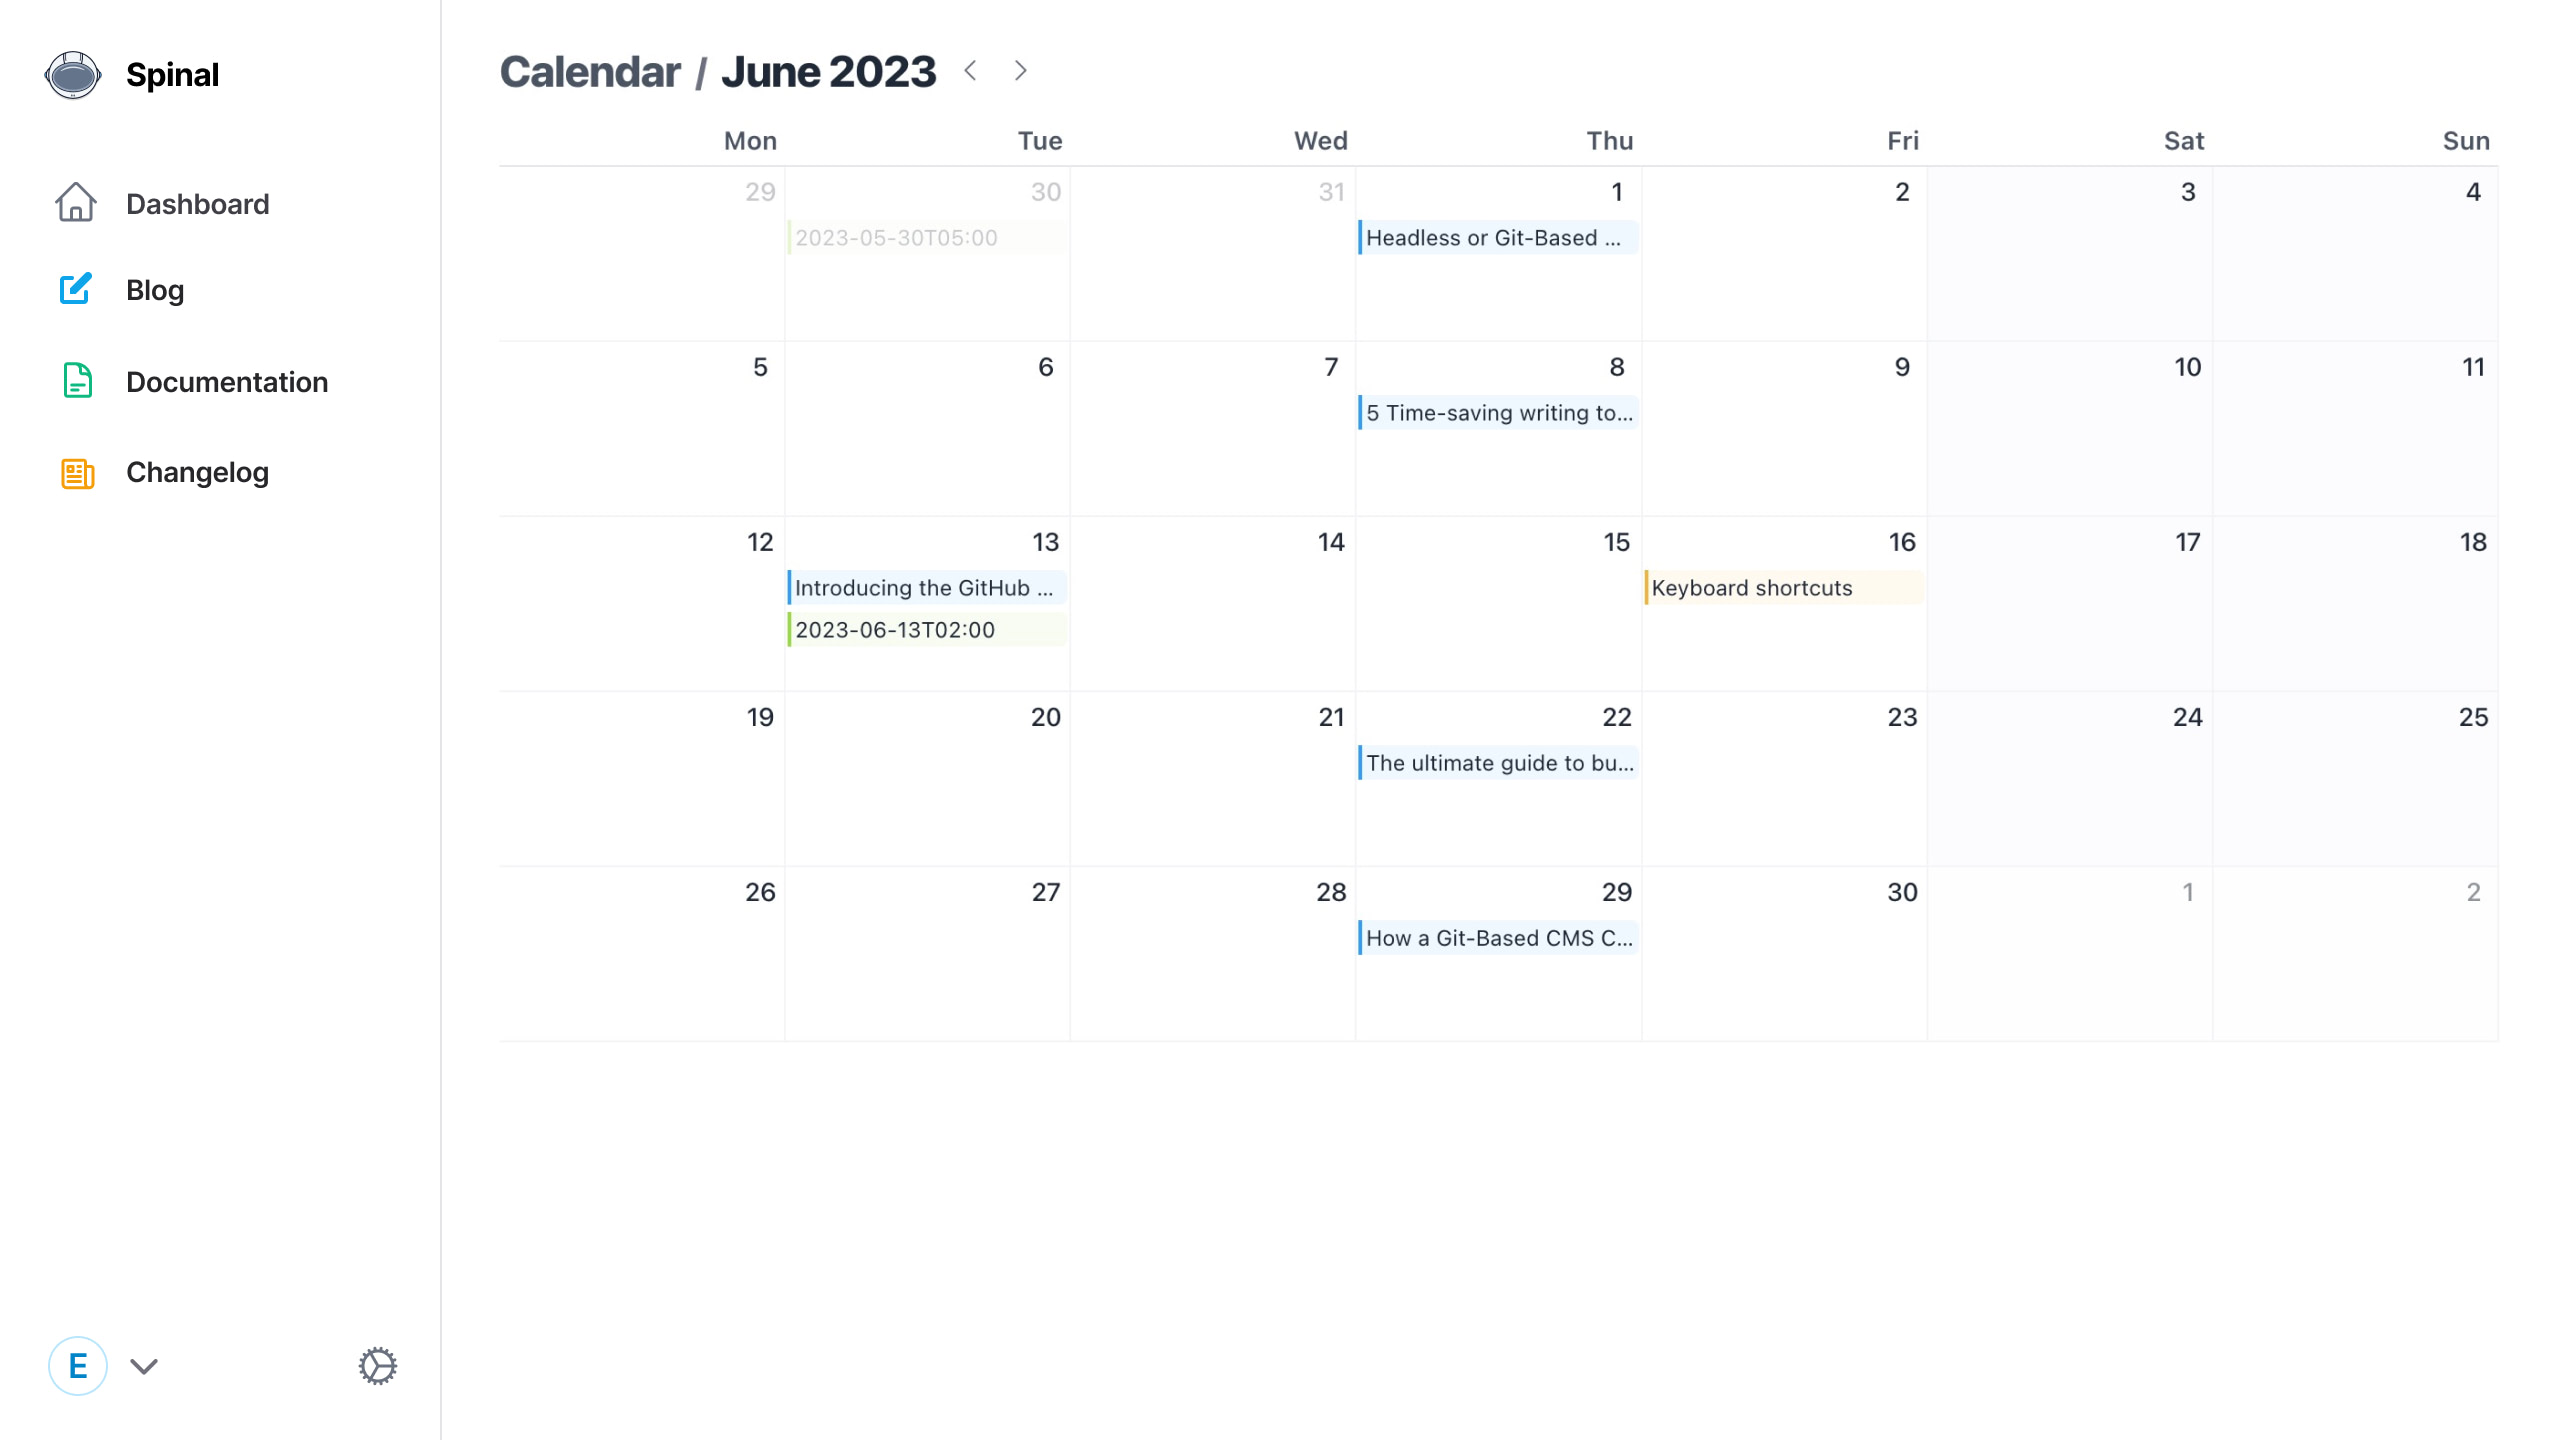 Showing the calendar for the month of June 2023, with content items shown on various days of the month